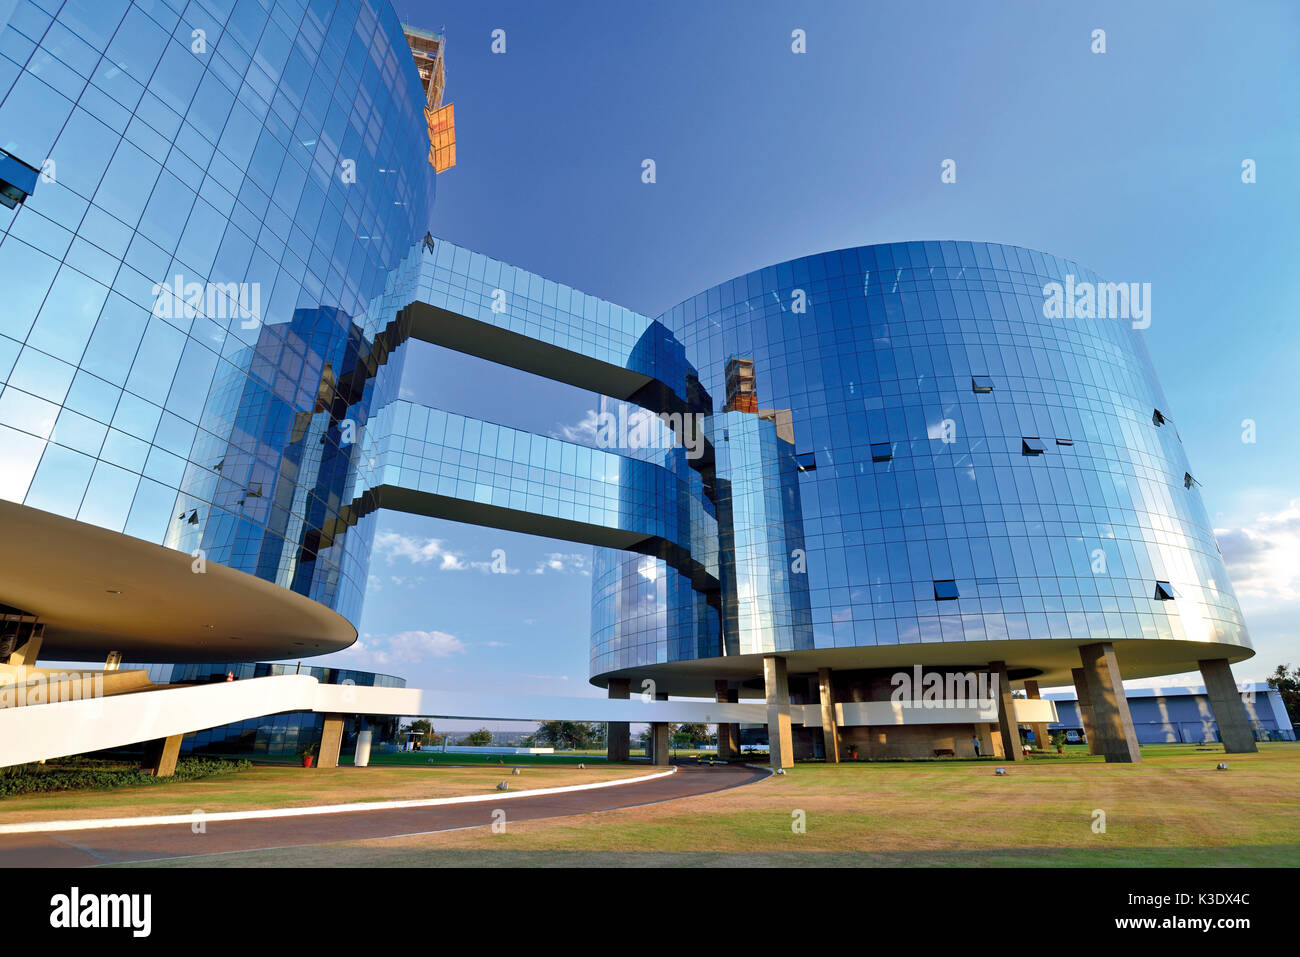 Brazil, Brazil, glass towers of the general public prosecutor's office 'Procuradoria Geral da Republica', designed by Oscar Niemeyer at the age of 95 years, Stock Photo